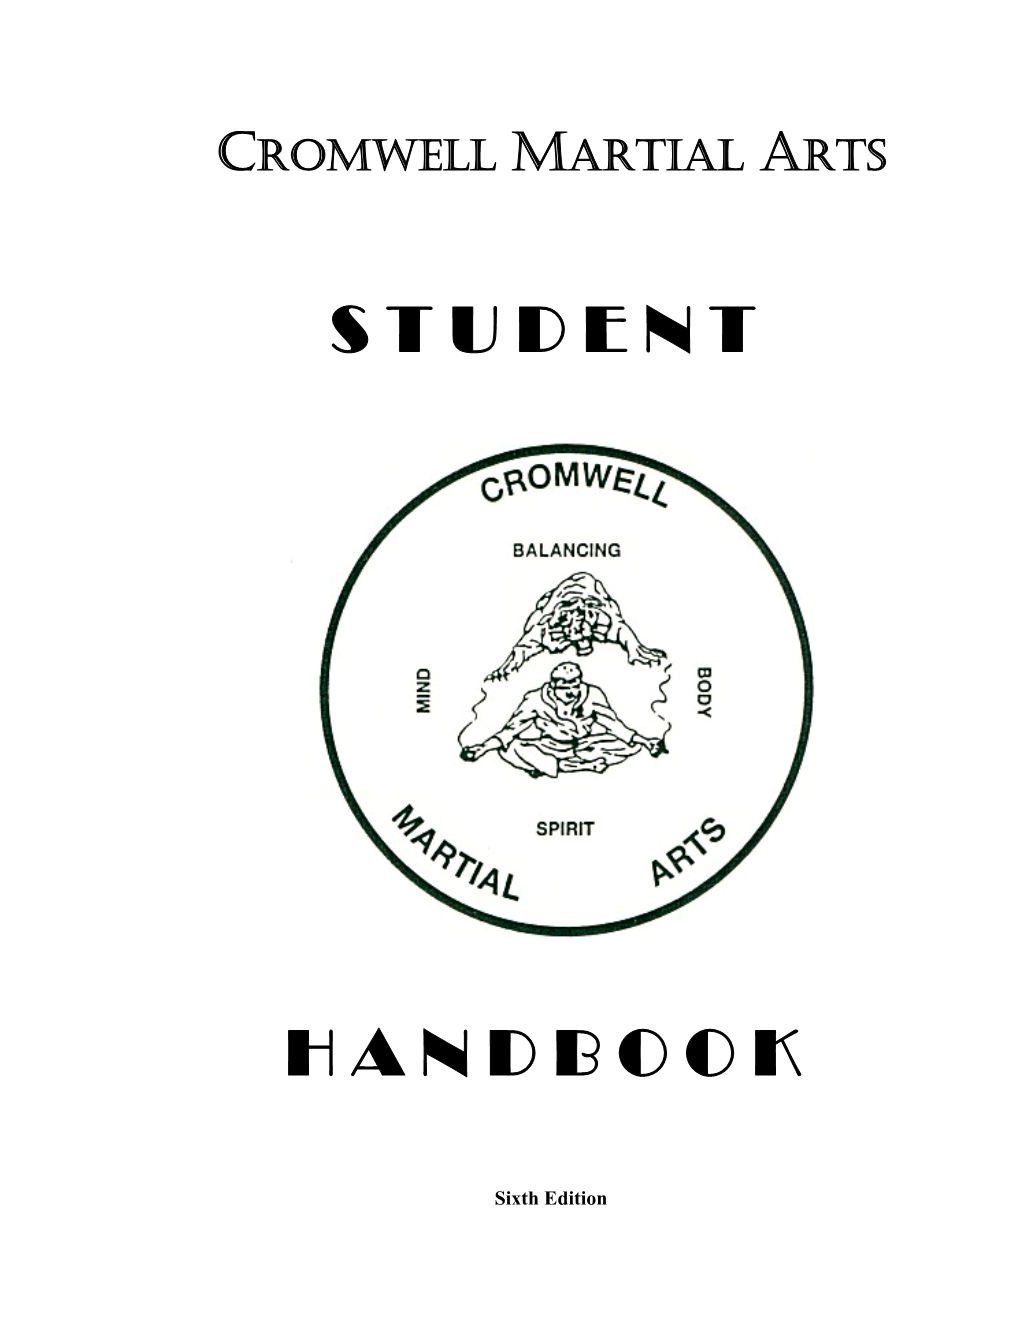 View Our Student Handbook